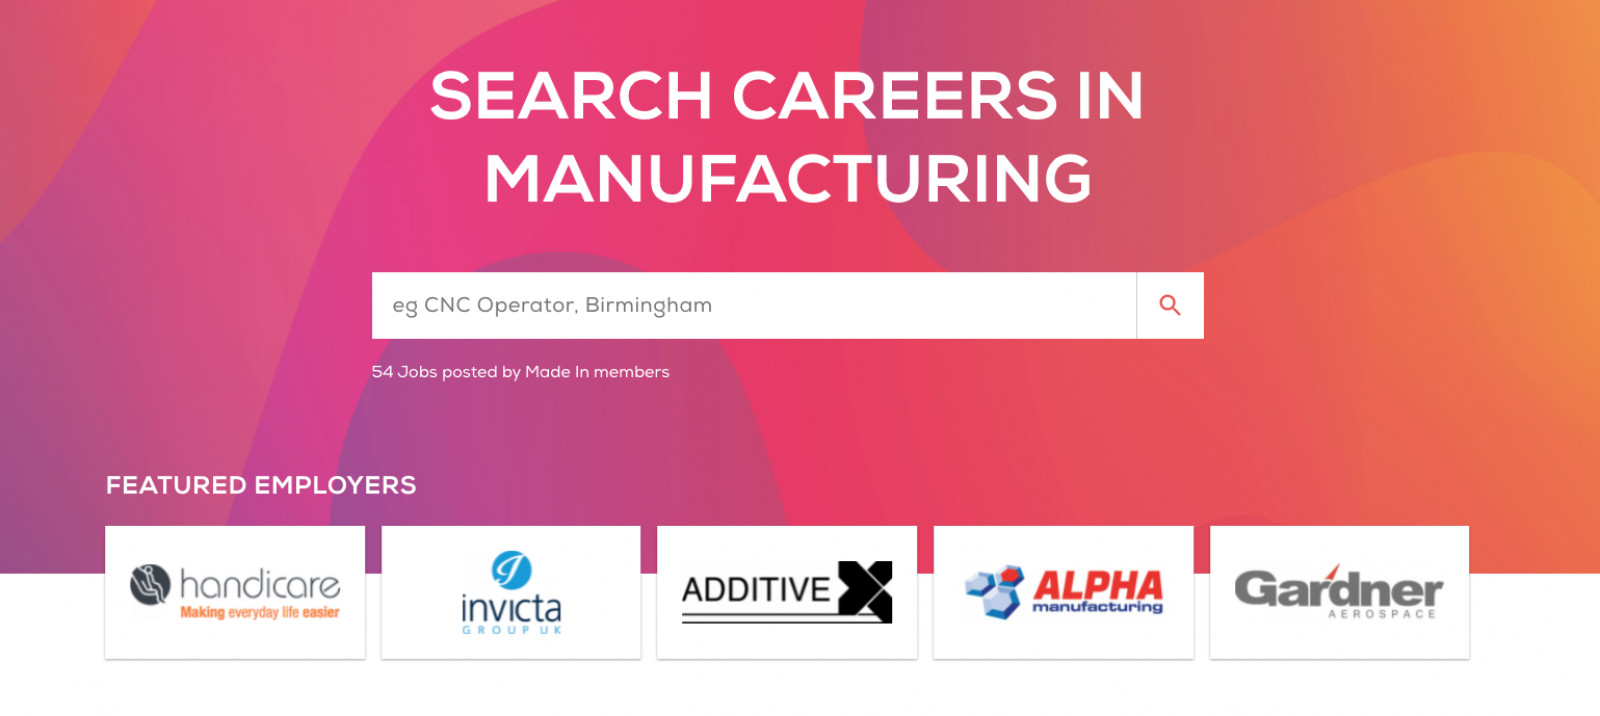 50+ Manufacturing Job Vacancies Available - What's...